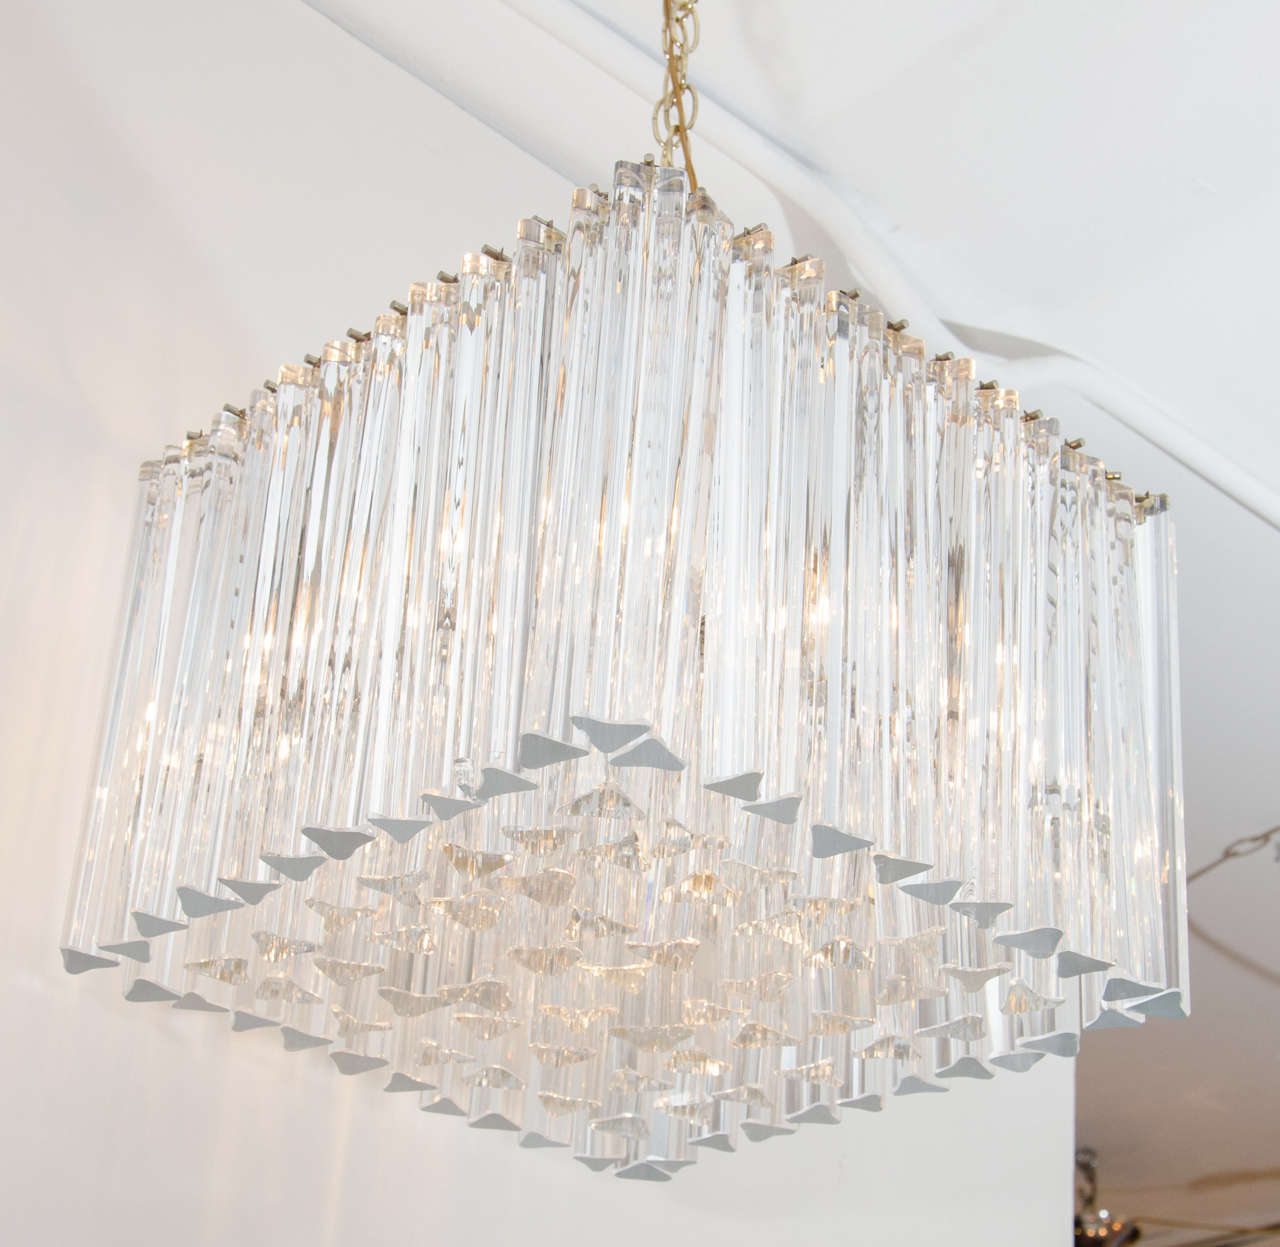 Beautiful and architectural chandelier by Camer. An unusual square armature holds several tiers of crystals of varying length which are arranged to be flush along the bottom. Versatile scale. Impressive. Please contact for location.